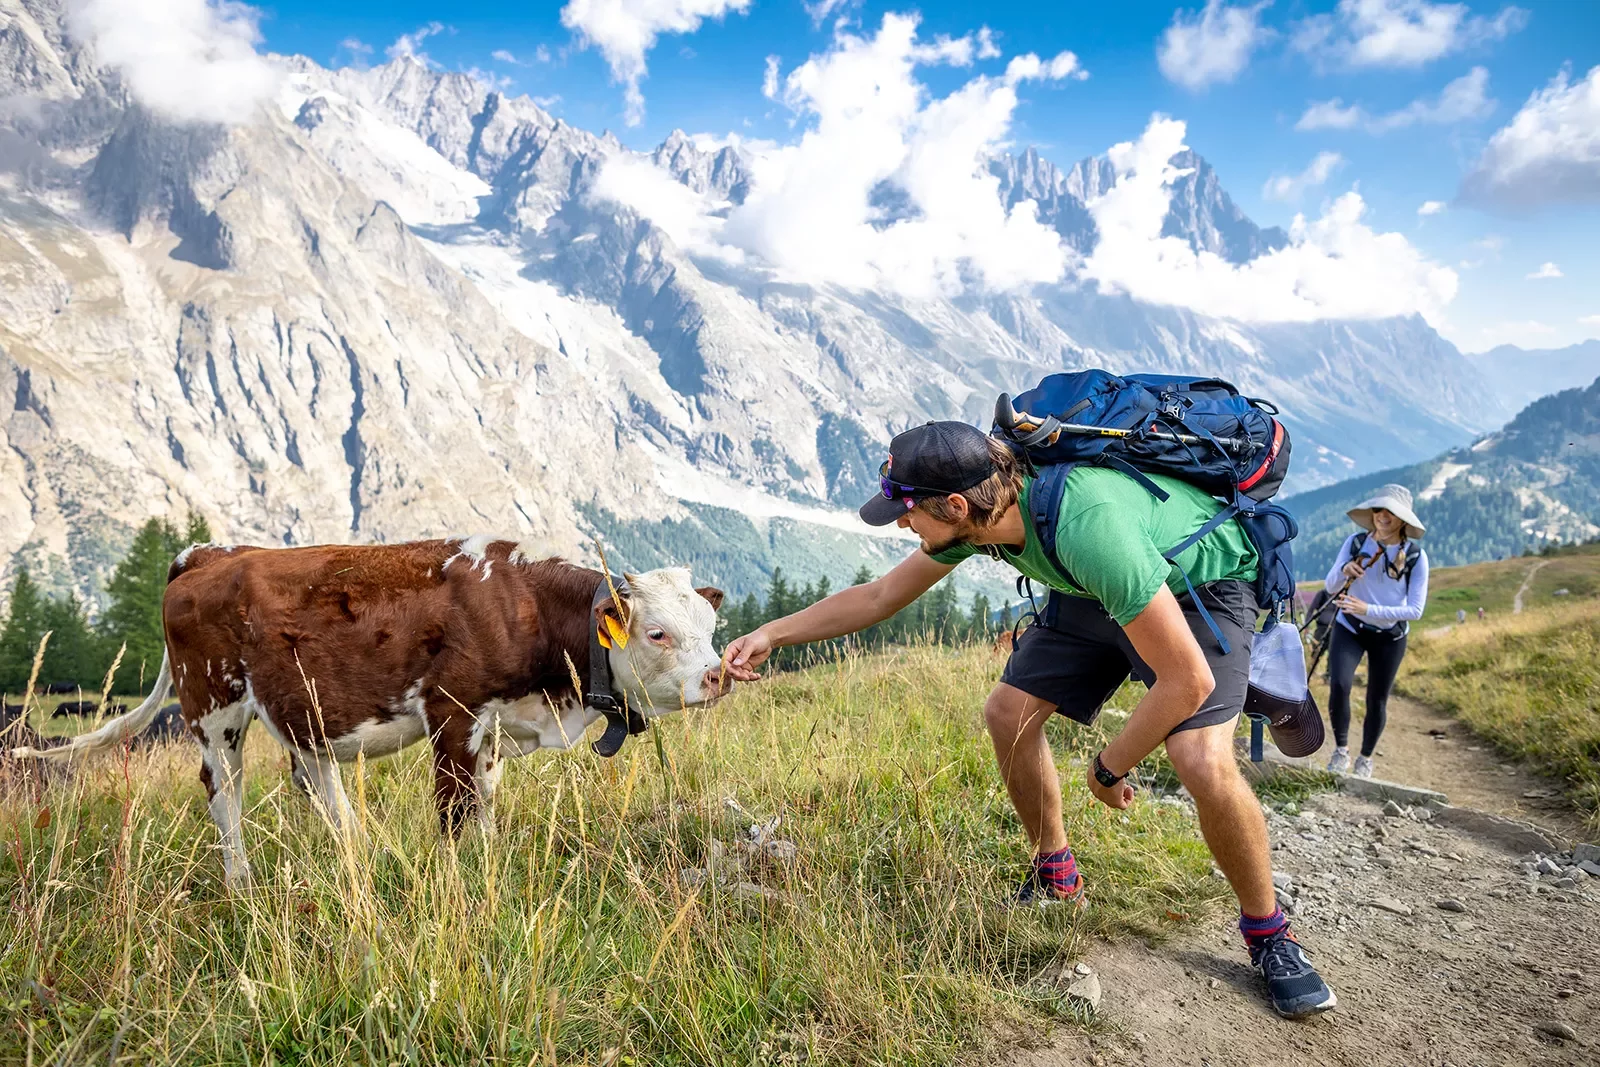 Two guests with cow, one reaching out to it, mountain in background.